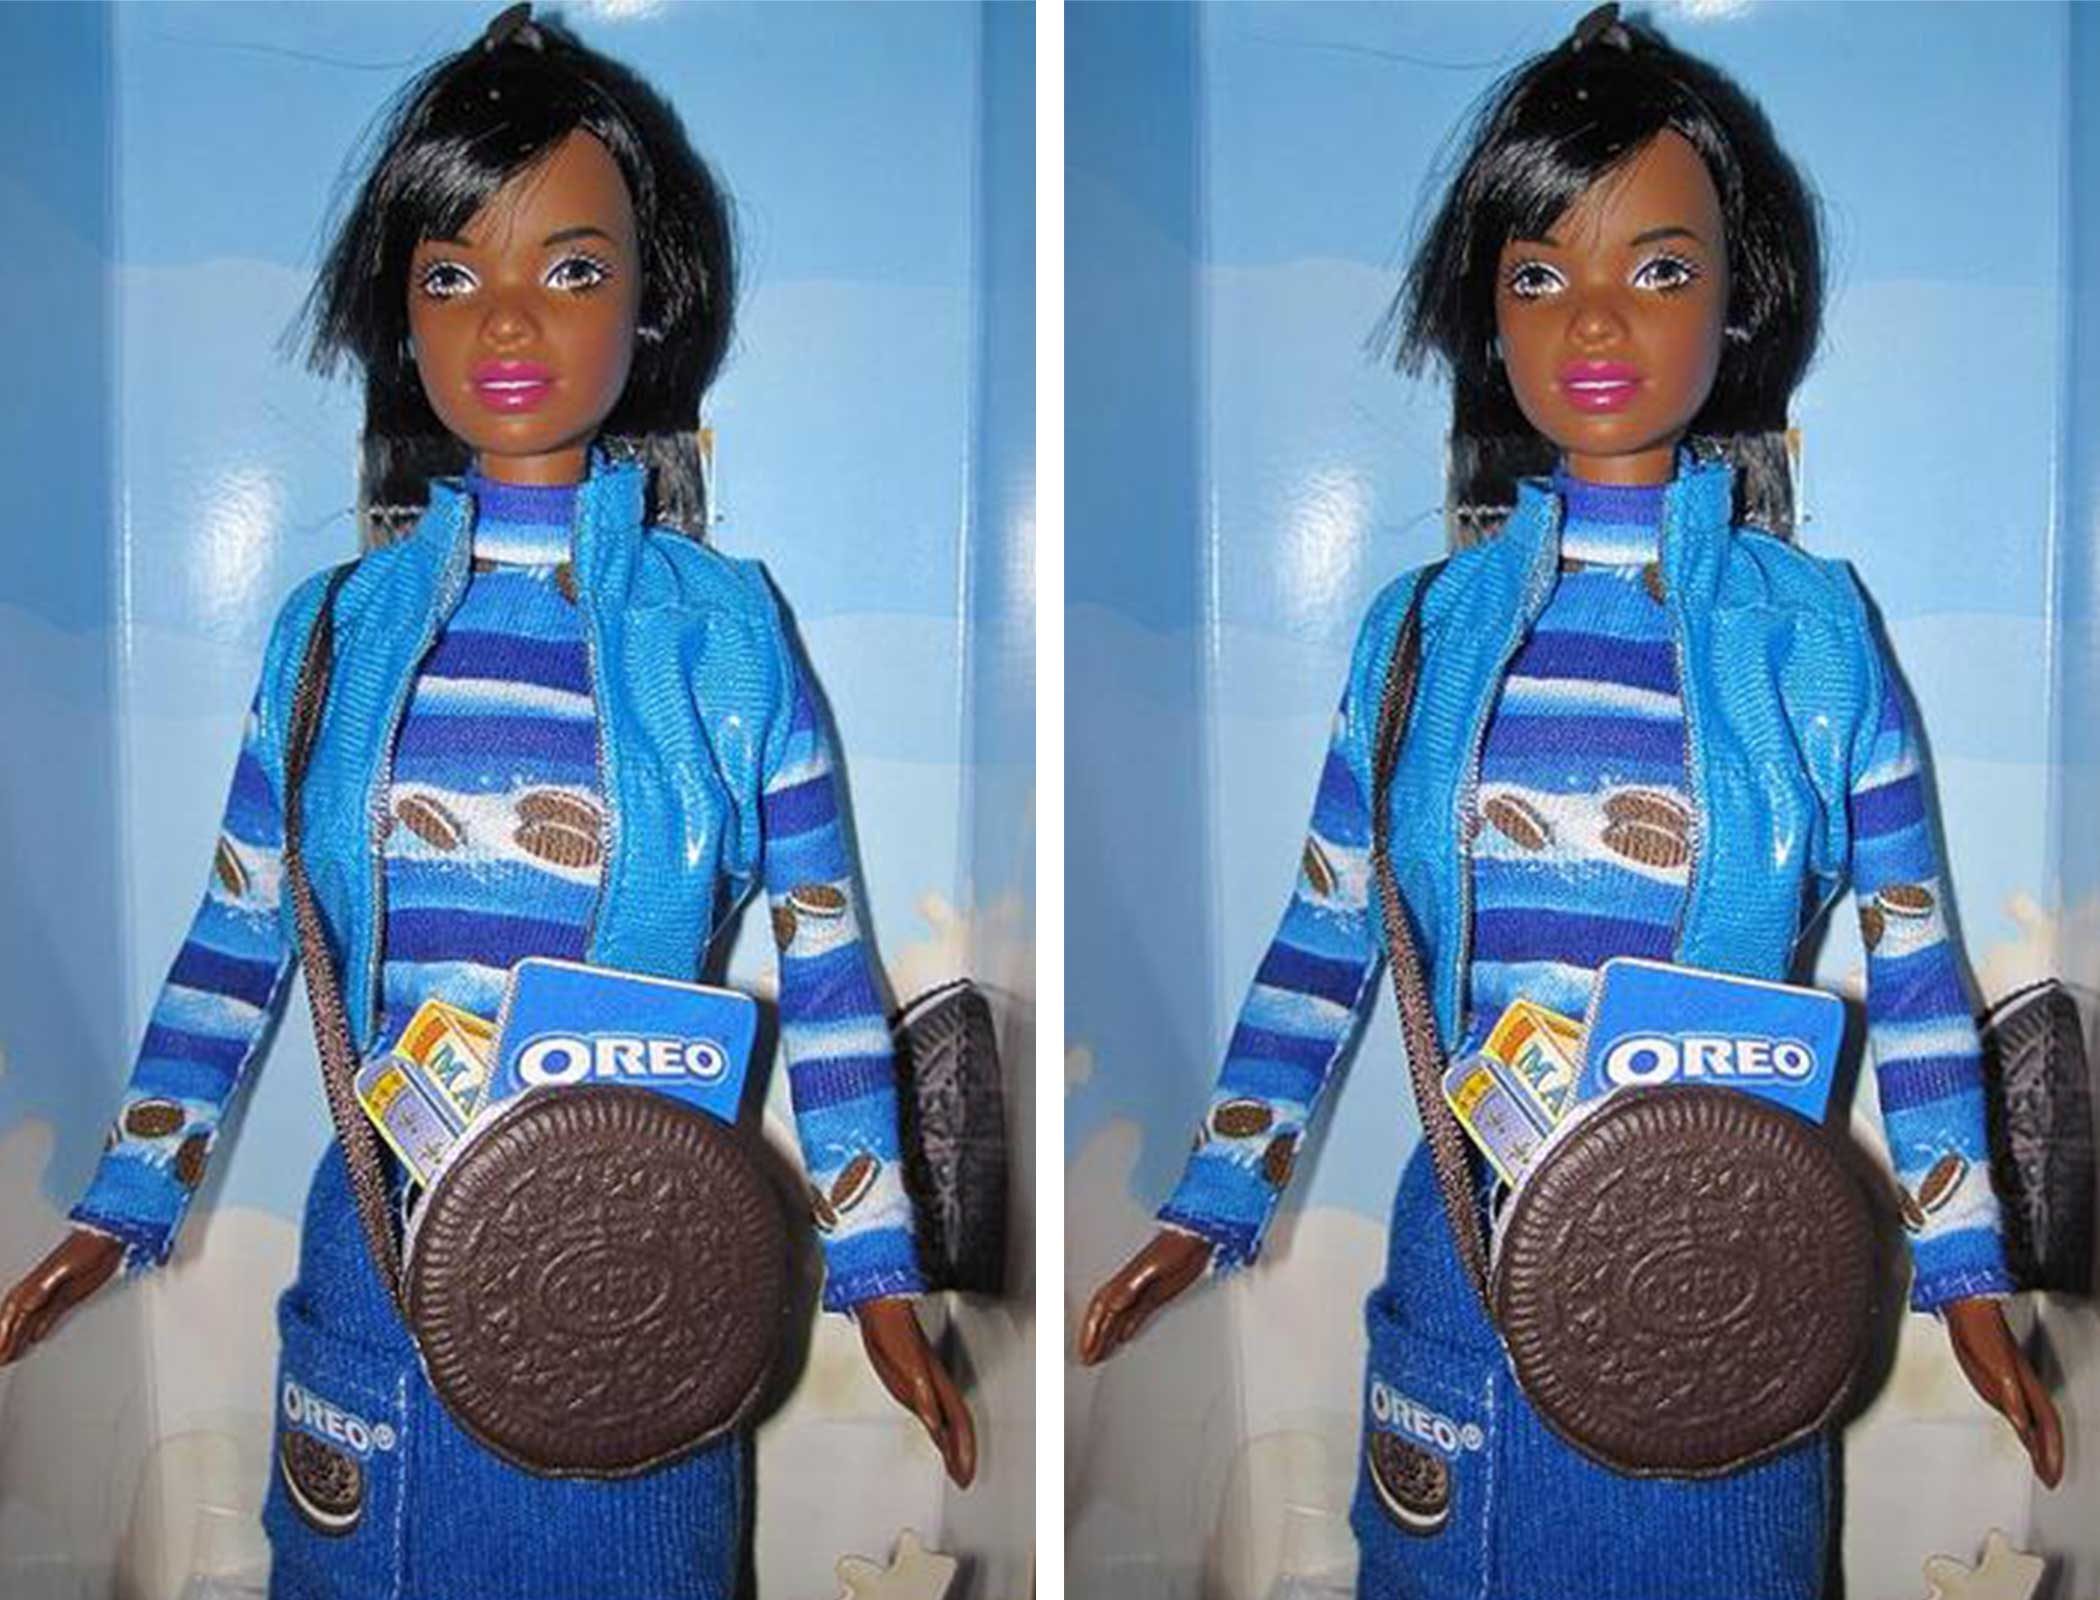 Barbie Doll Controversies You Forgot About | Reader's Digest